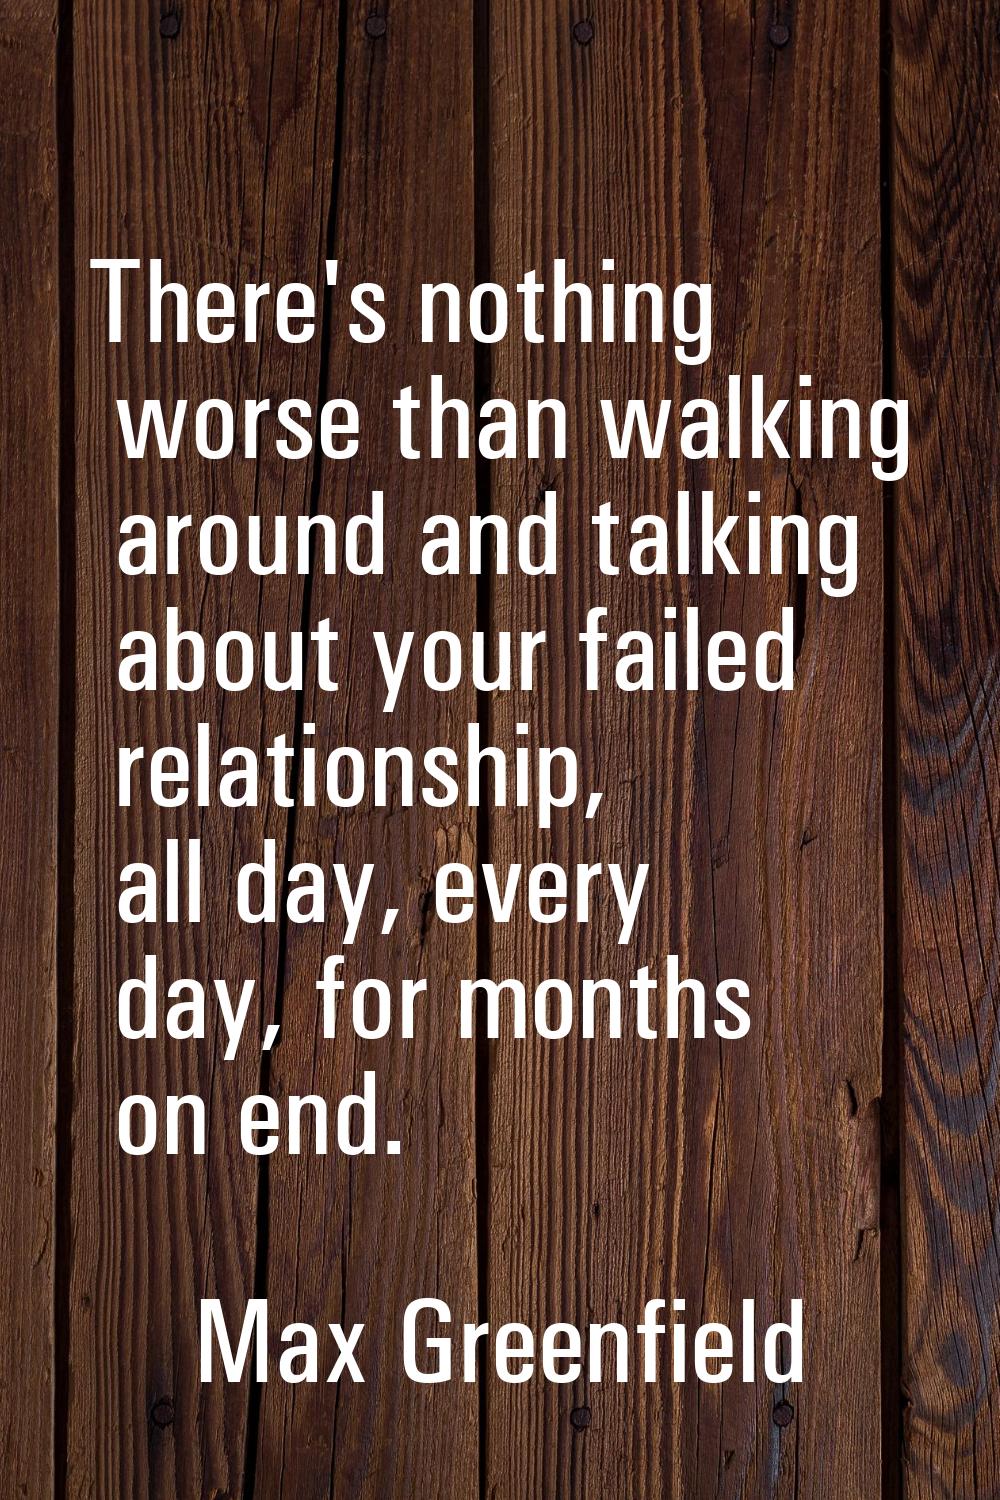 There's nothing worse than walking around and talking about your failed relationship, all day, ever